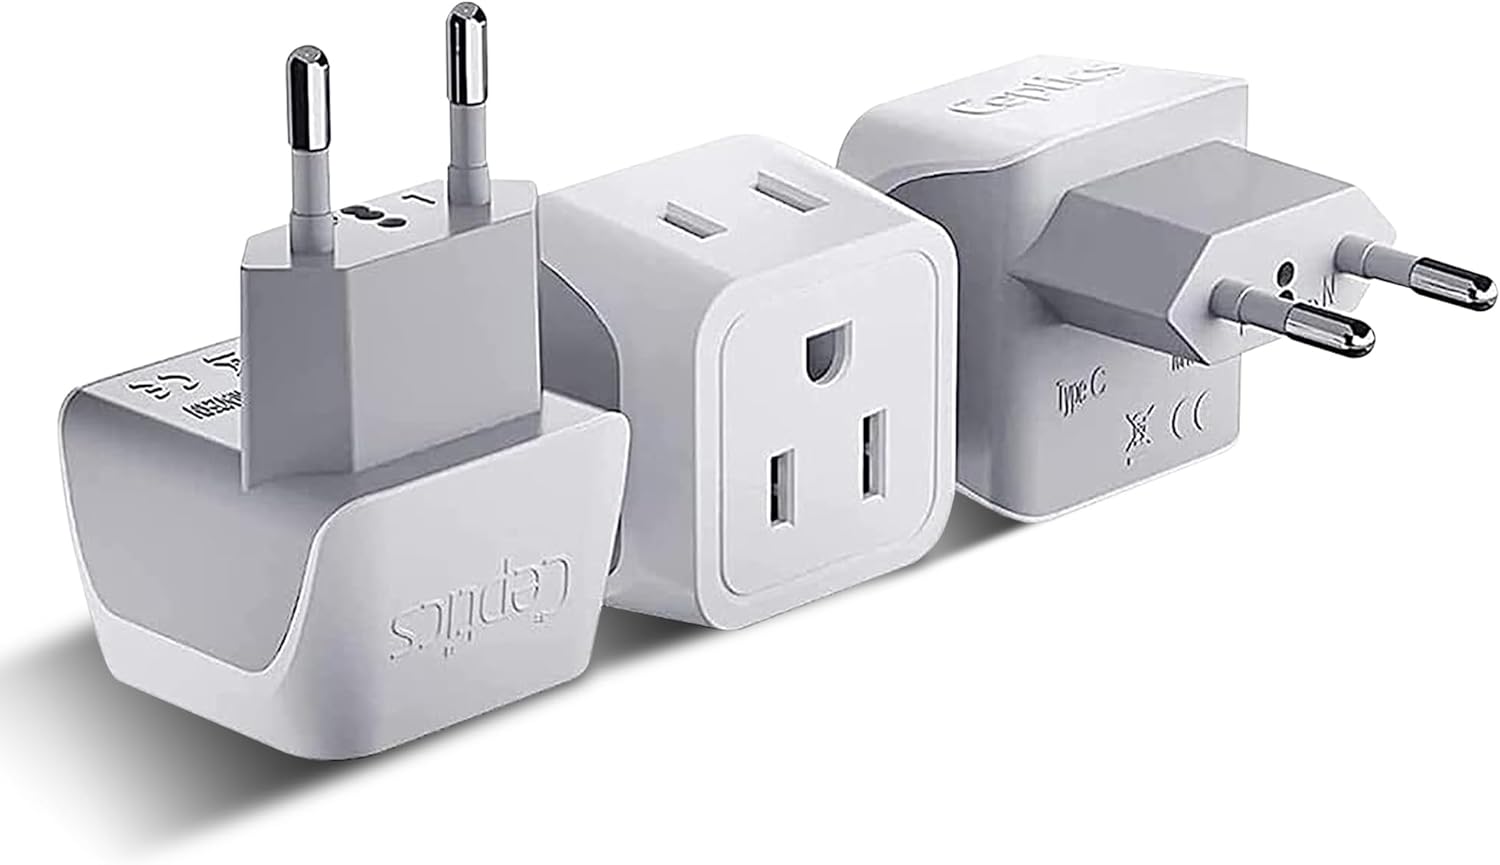 Power outlet and plug